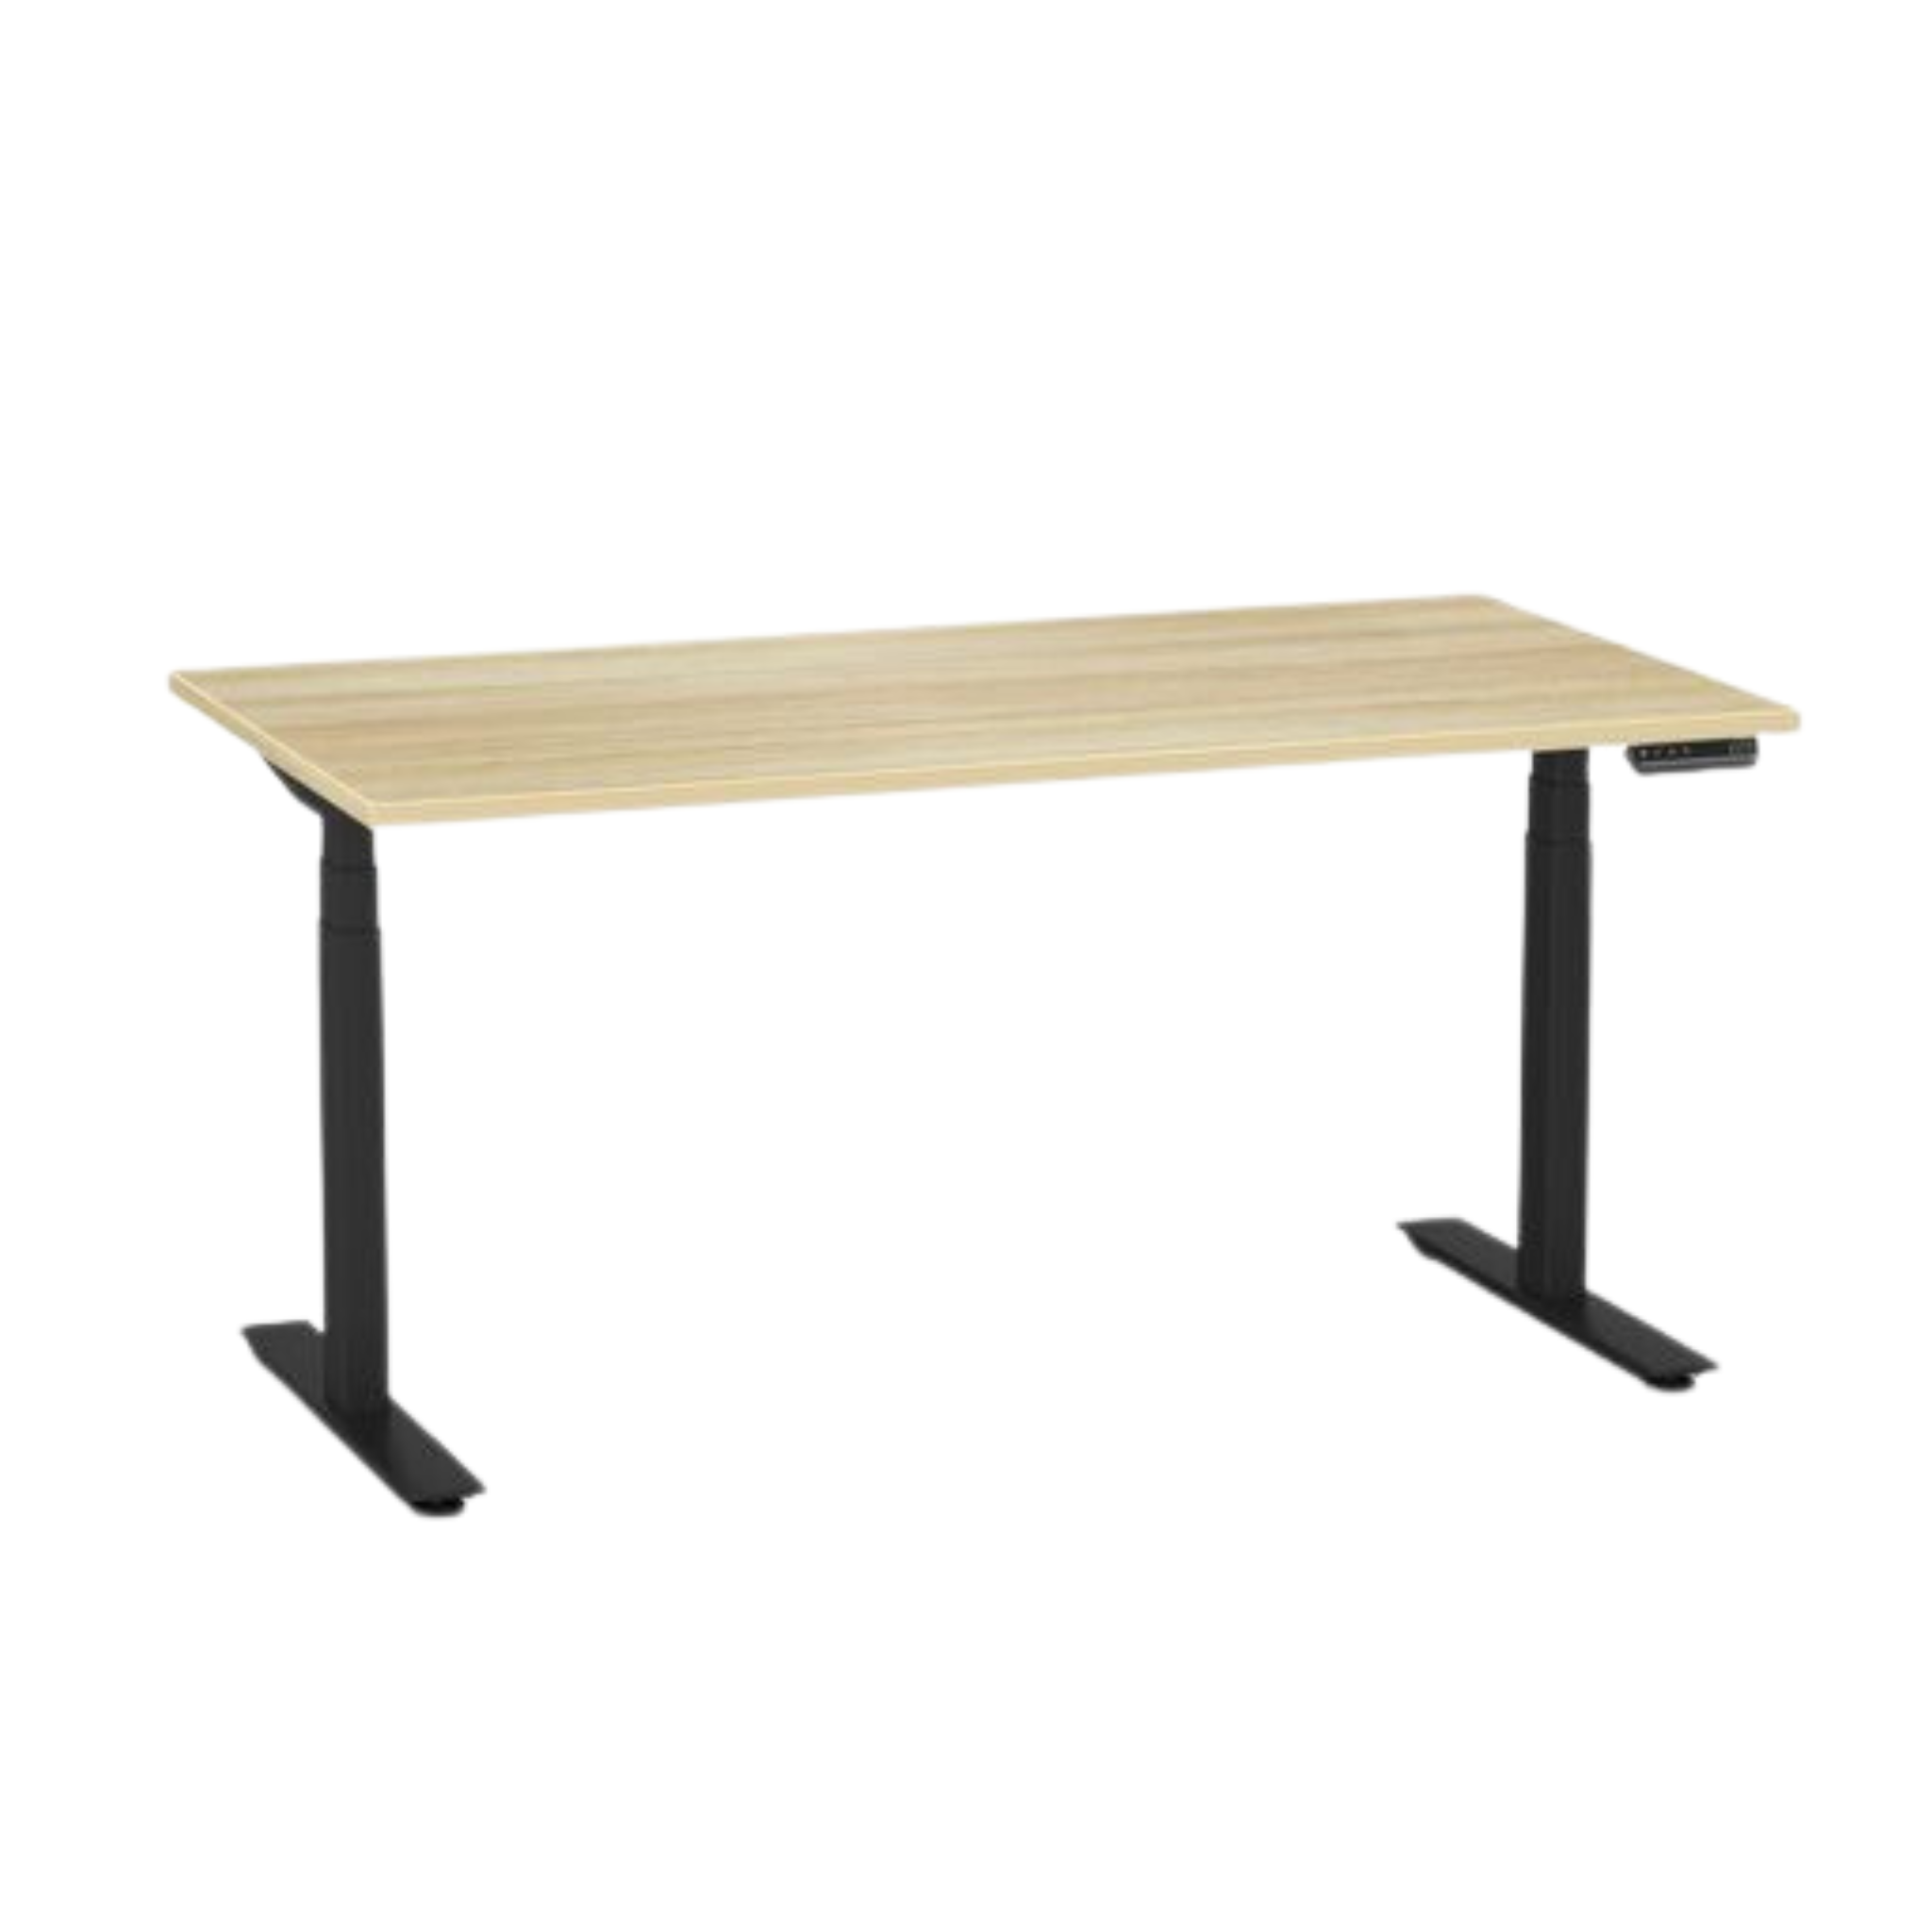 Agile Pro electric sit to stand desk with black frame and atlantic oak top